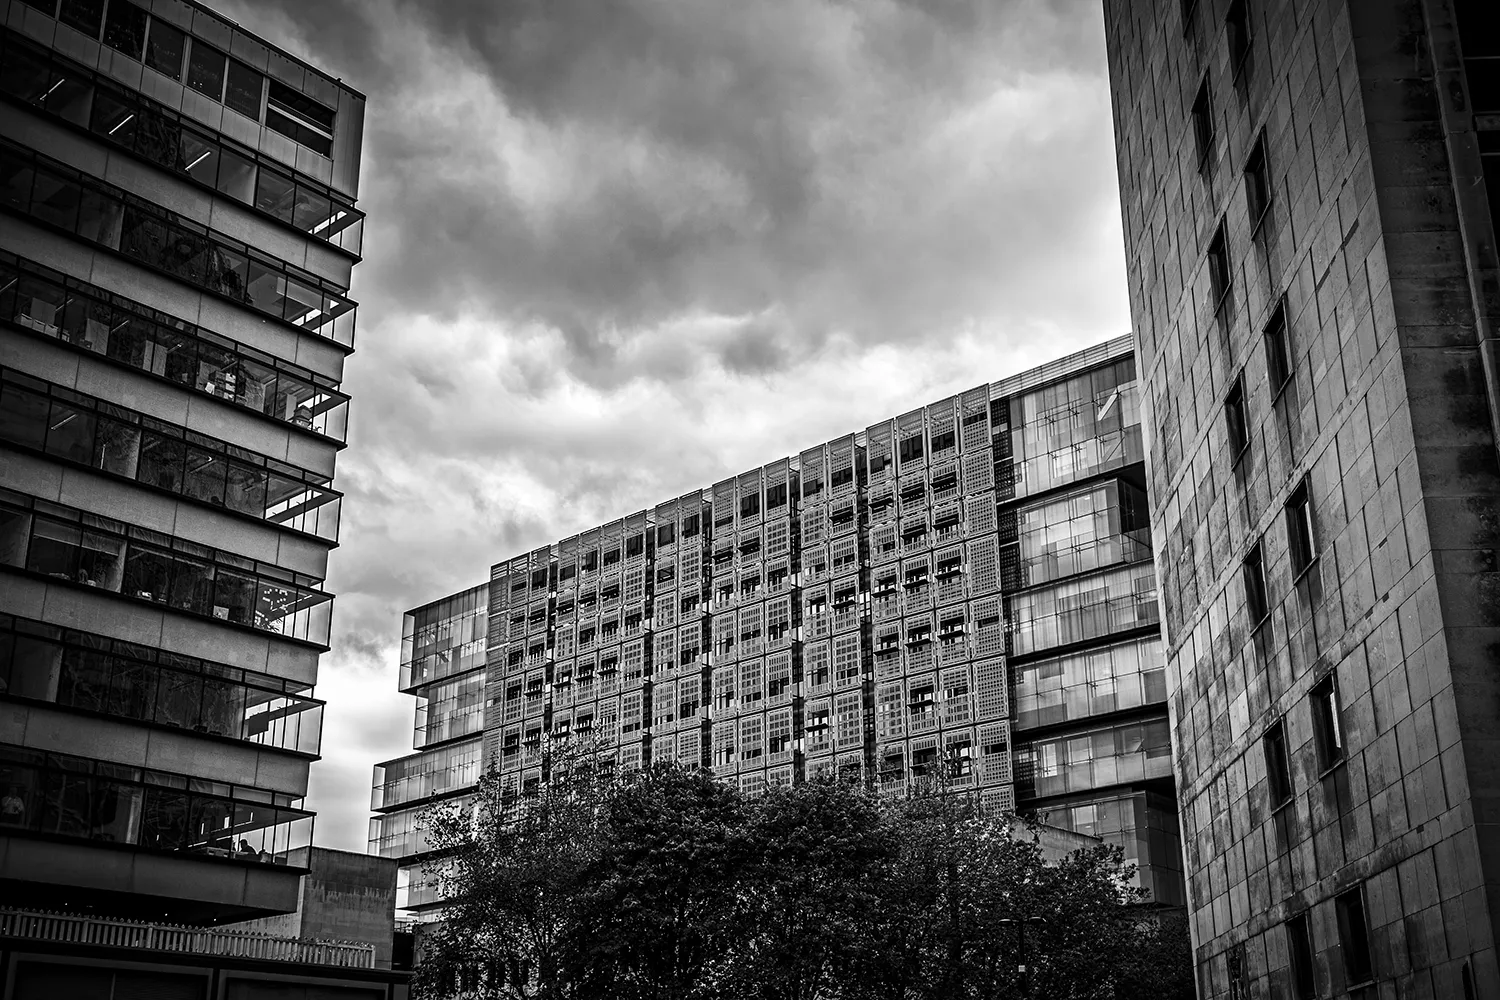 Three Towers, Manchester, Black and white landscape Manchester Landscapes Architecture